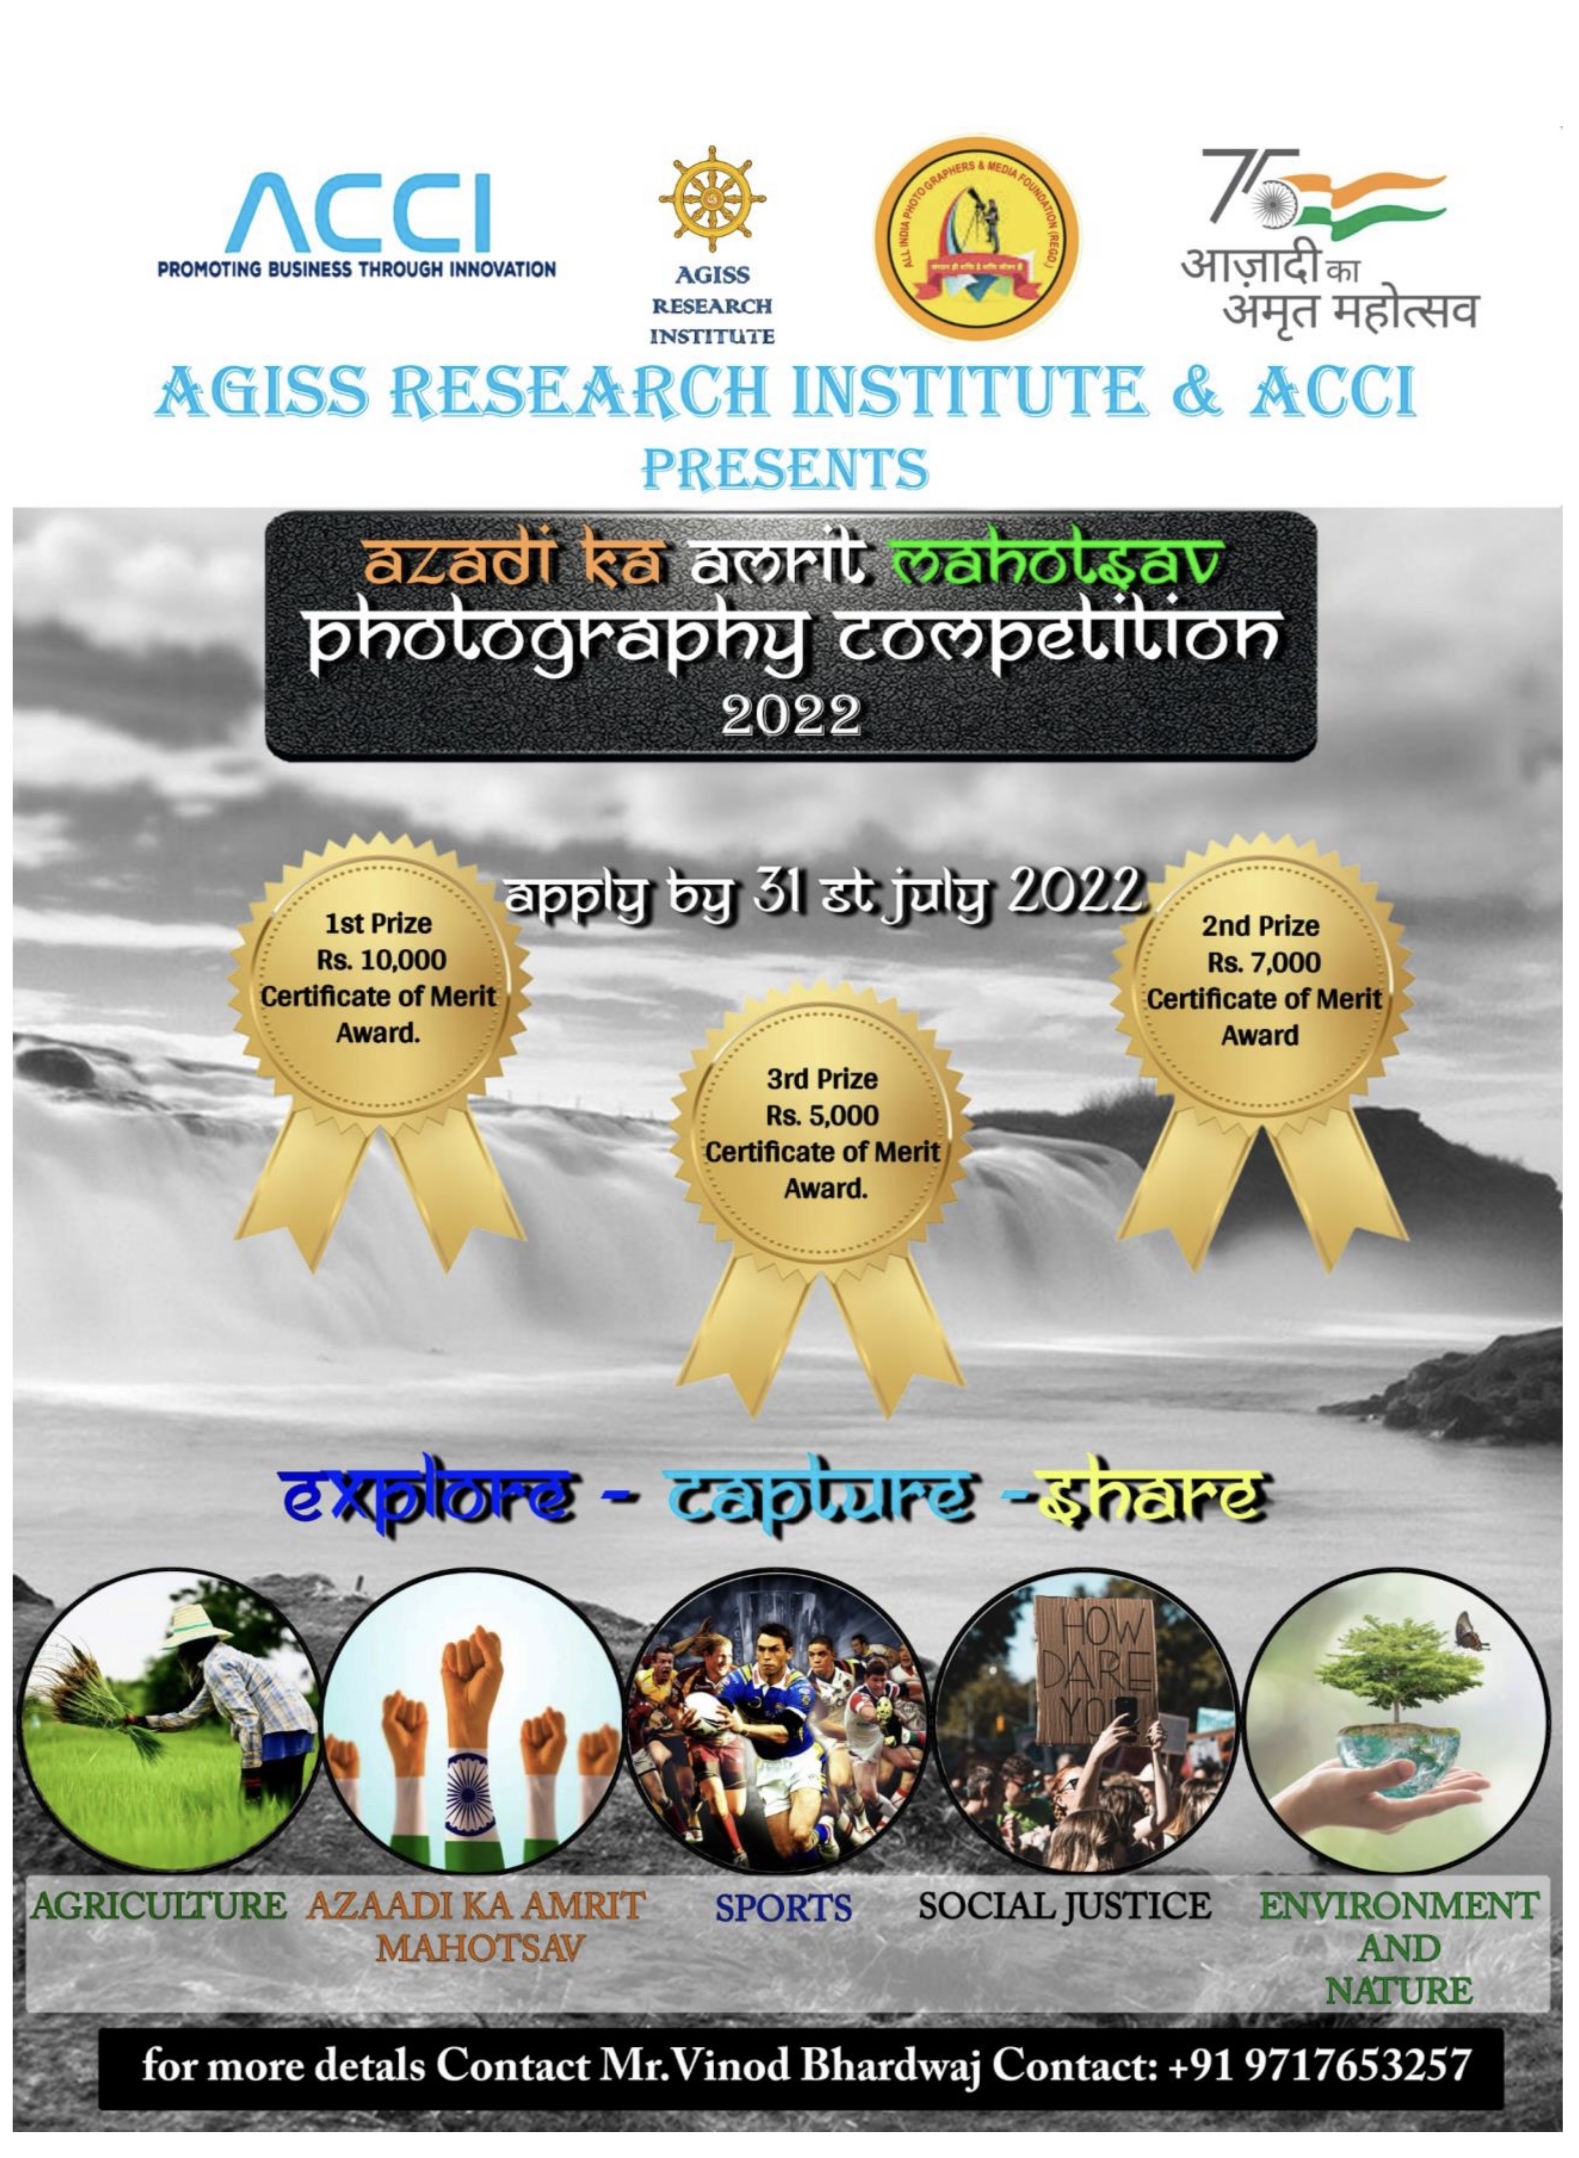 AGISS RESEARCH INSTITUTE AND ACCI PRESENTS PHOTOGRAPHY COMPETITION: 31JULY, 2022